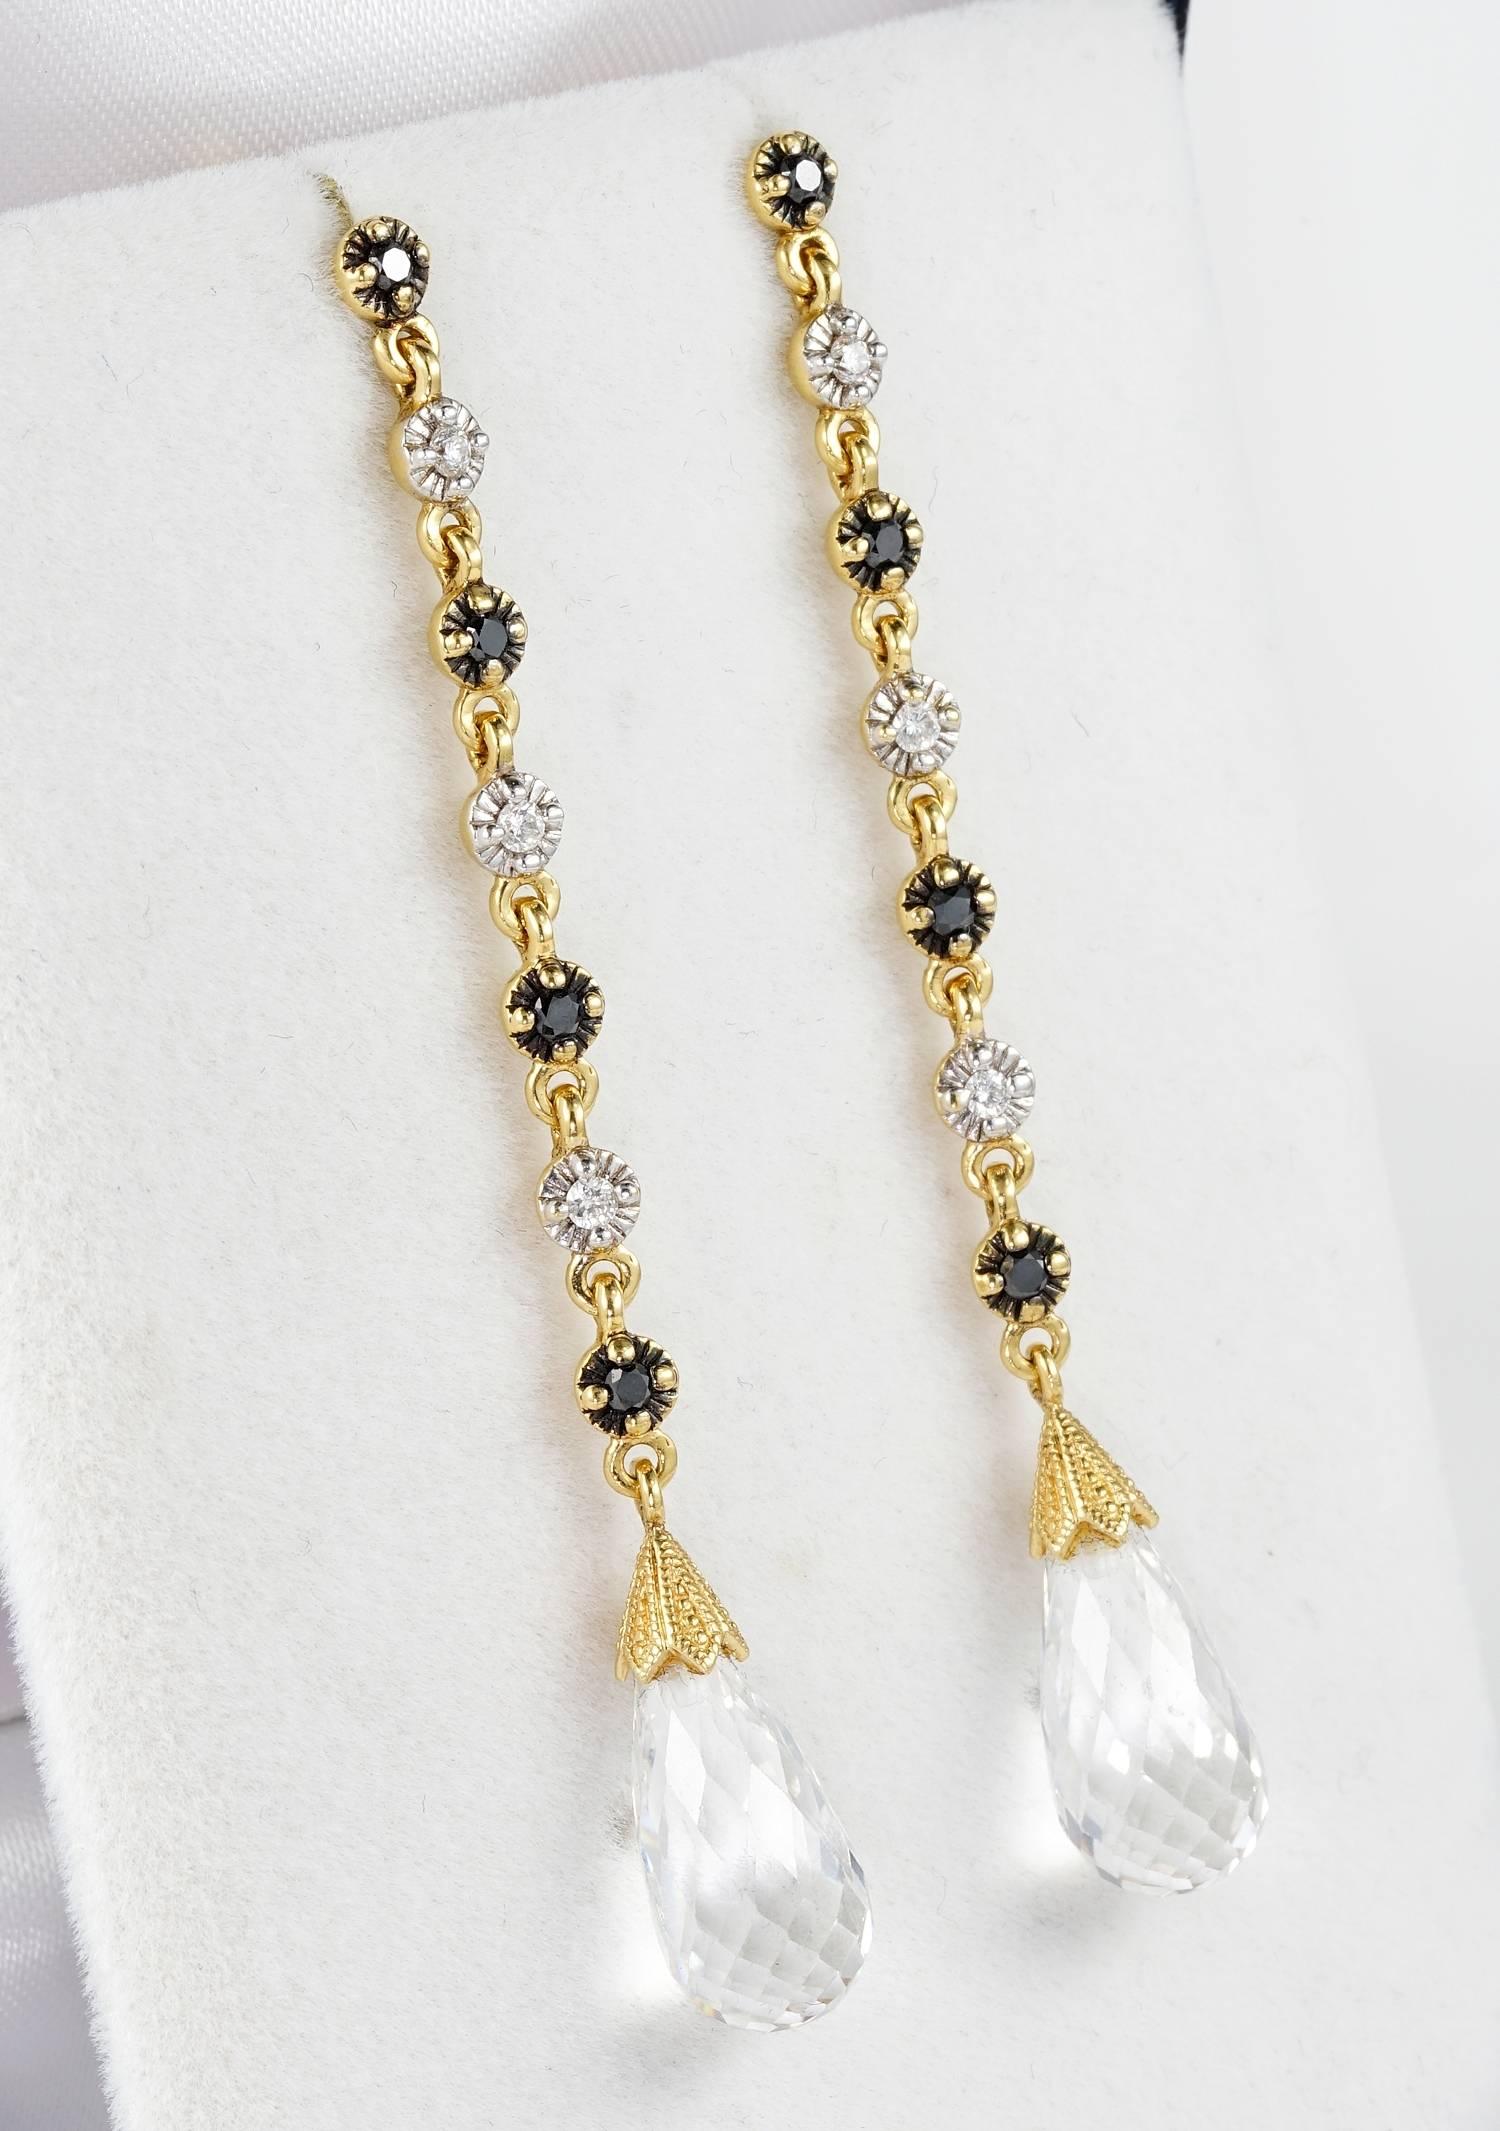 Fantastic pair of natural Rock Crystal drops with complement of black and white Diamonds set along the line.
A superlative vinatge pair of the Italin jewellery, 1950 ca
Diamonds total content is .65 ct for both black
Individually hand crafted of